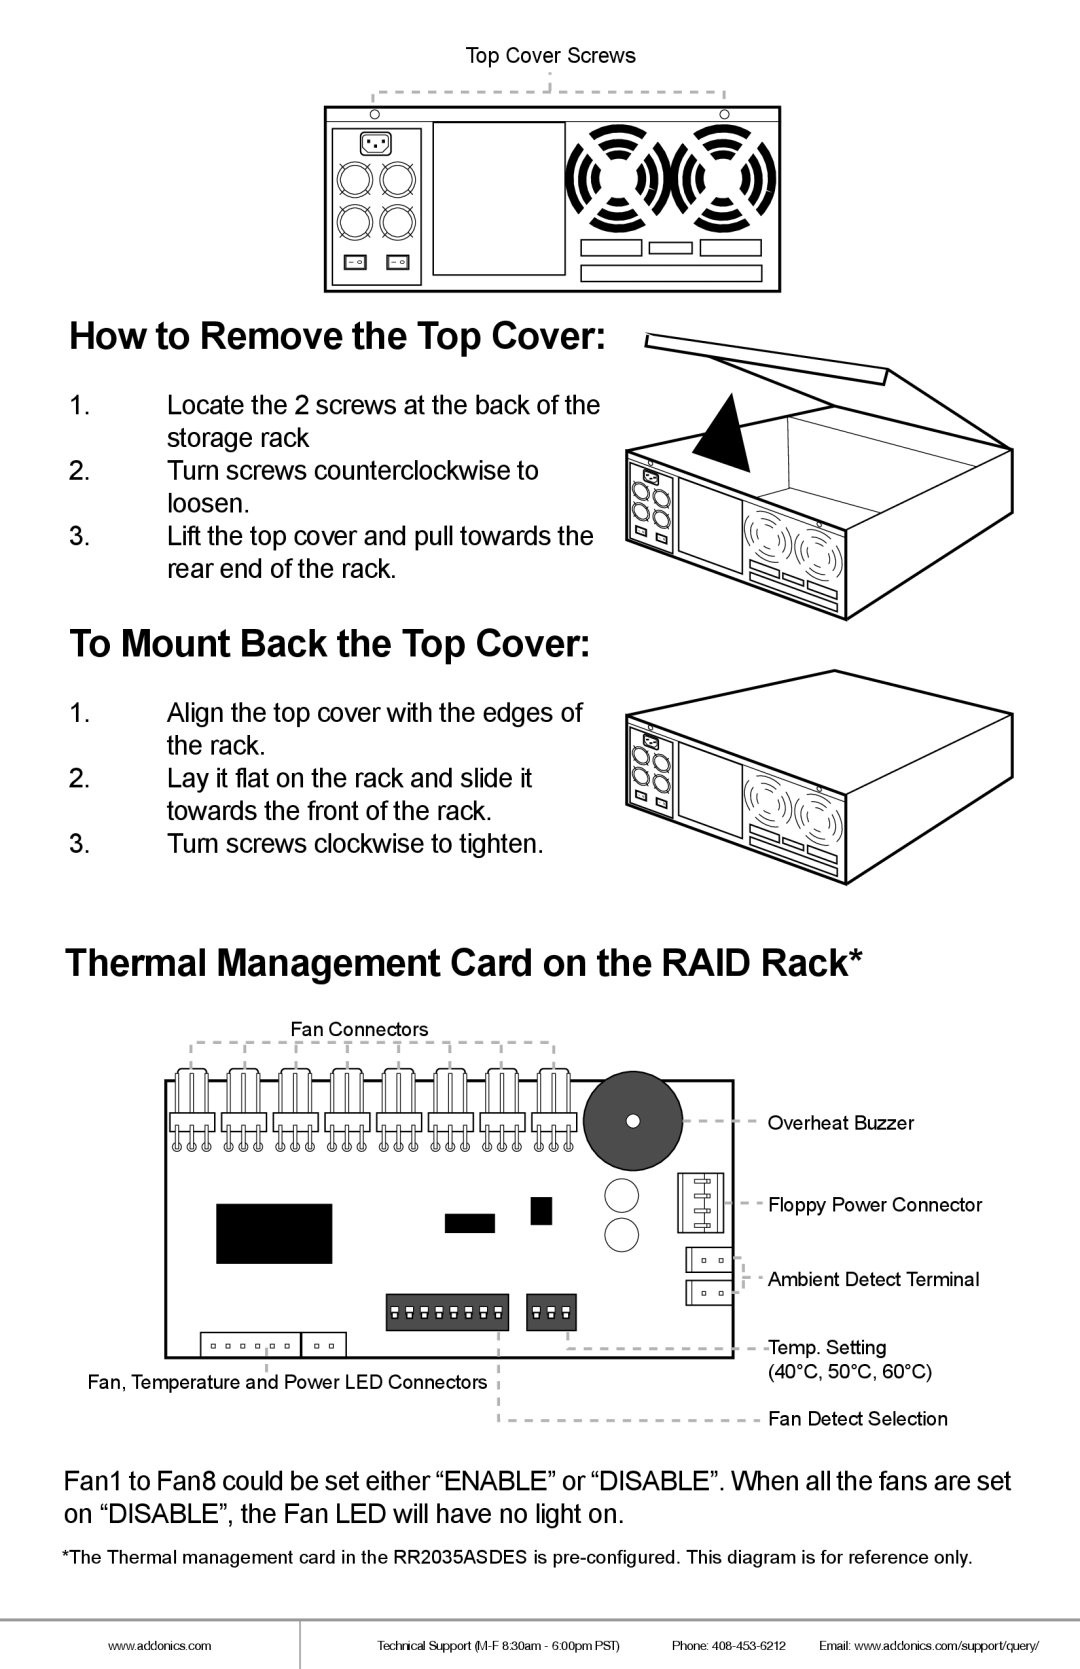 Addonics Technologies RR2035ASDES manual Thermal Management Card on the RAID Rack, How to Remove the Top Cover 